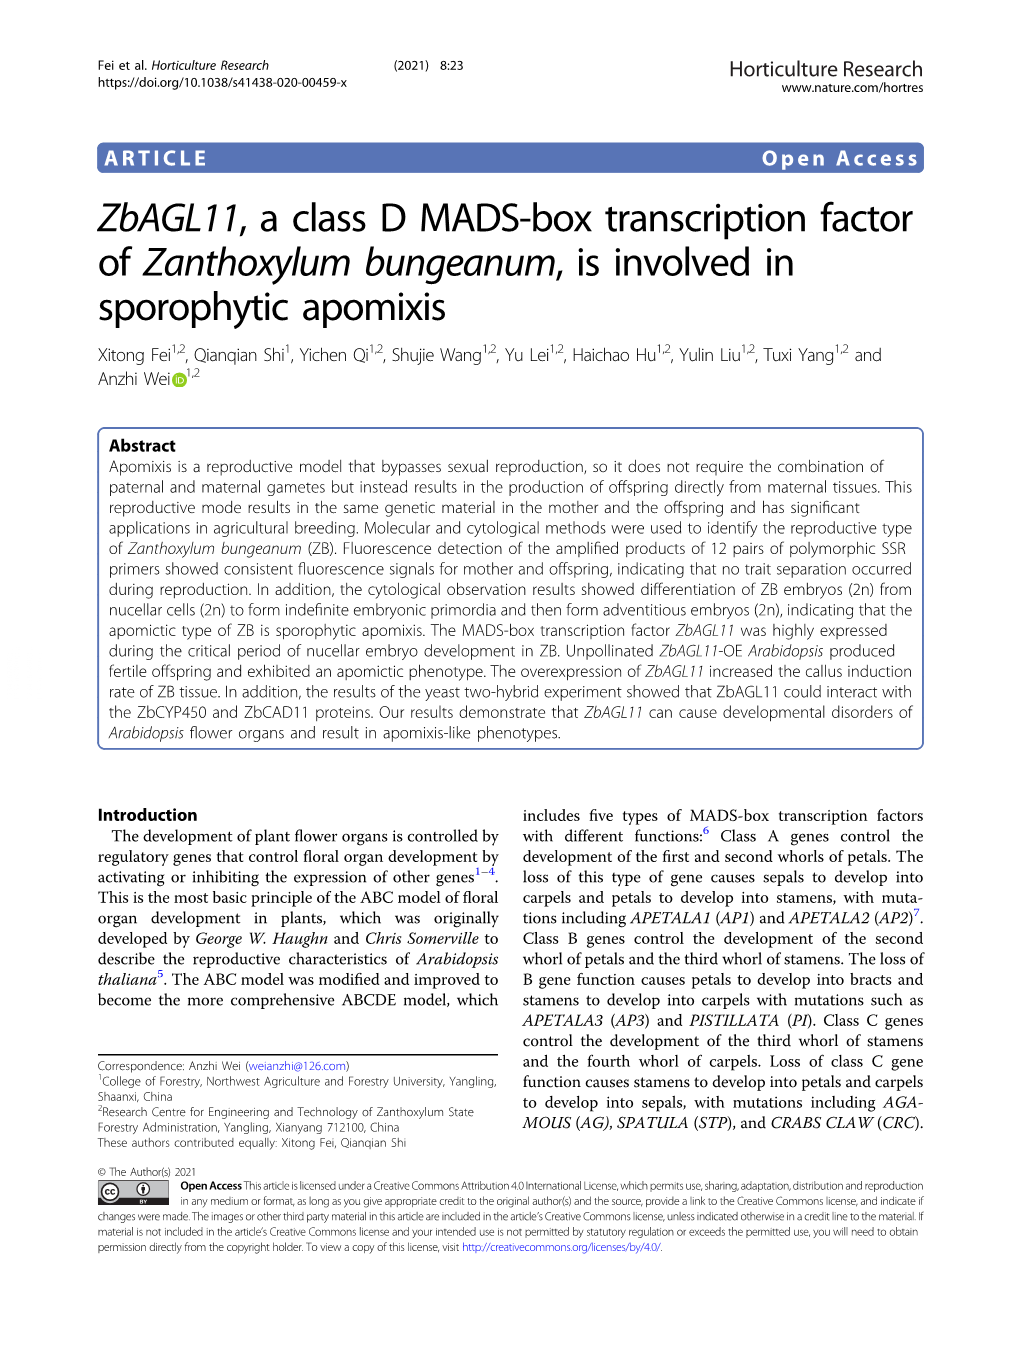 Zbagl11, a Class D MADS-Box Transcription Factor of Zanthoxylum Bungeanum, Is Involved in Sporophytic Apomixis